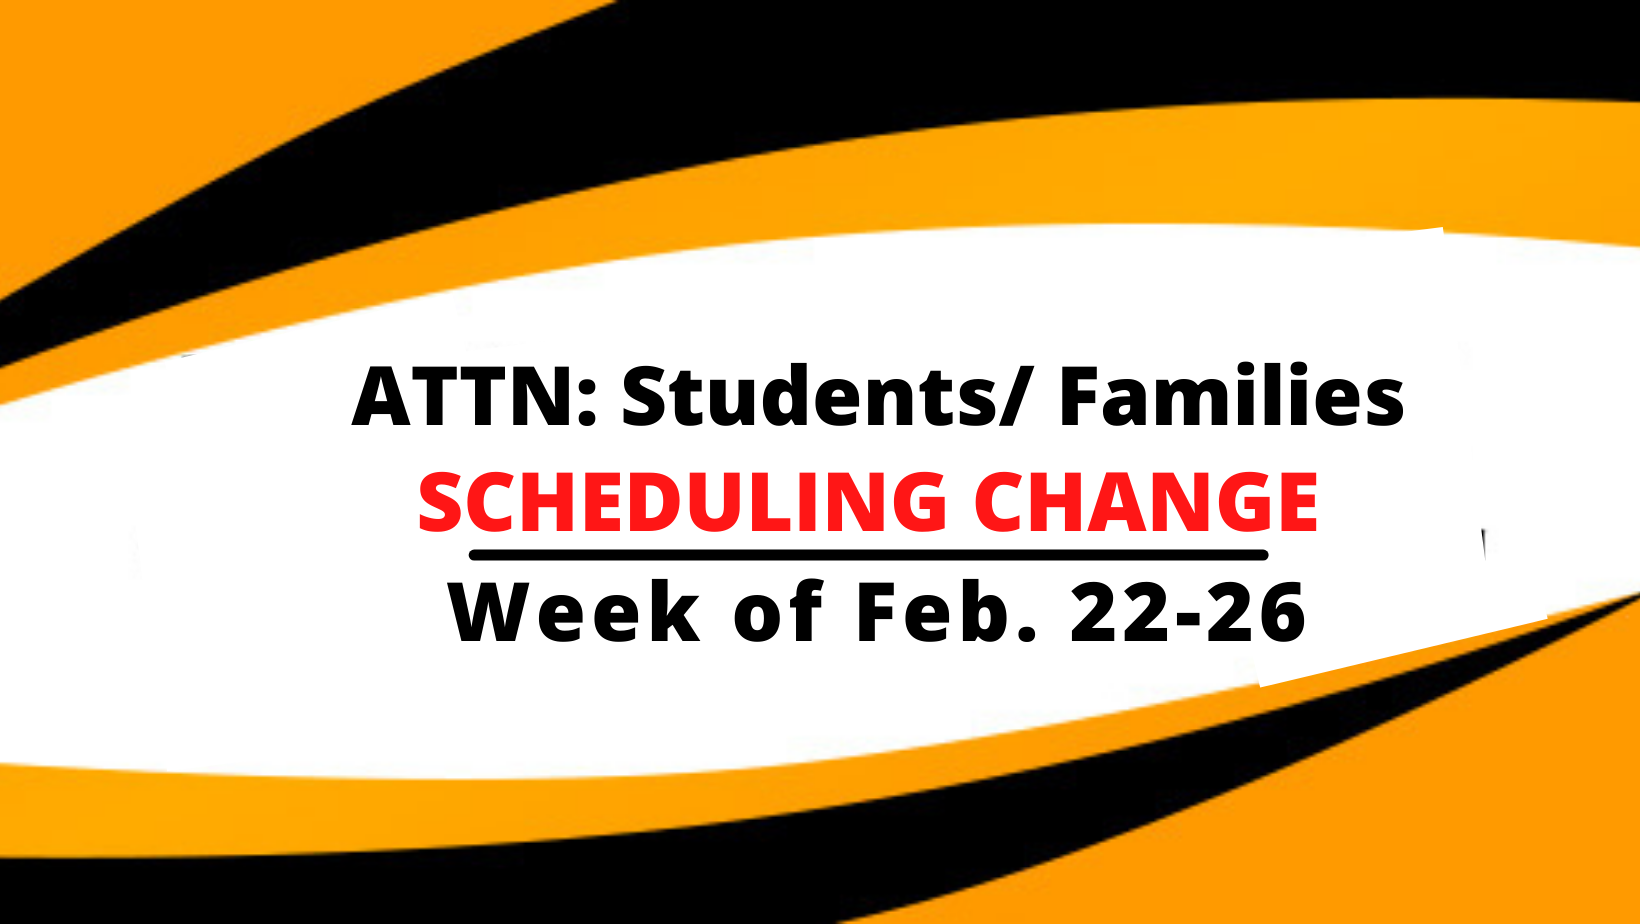 ATTENTION: Students/Families Scheduling Change